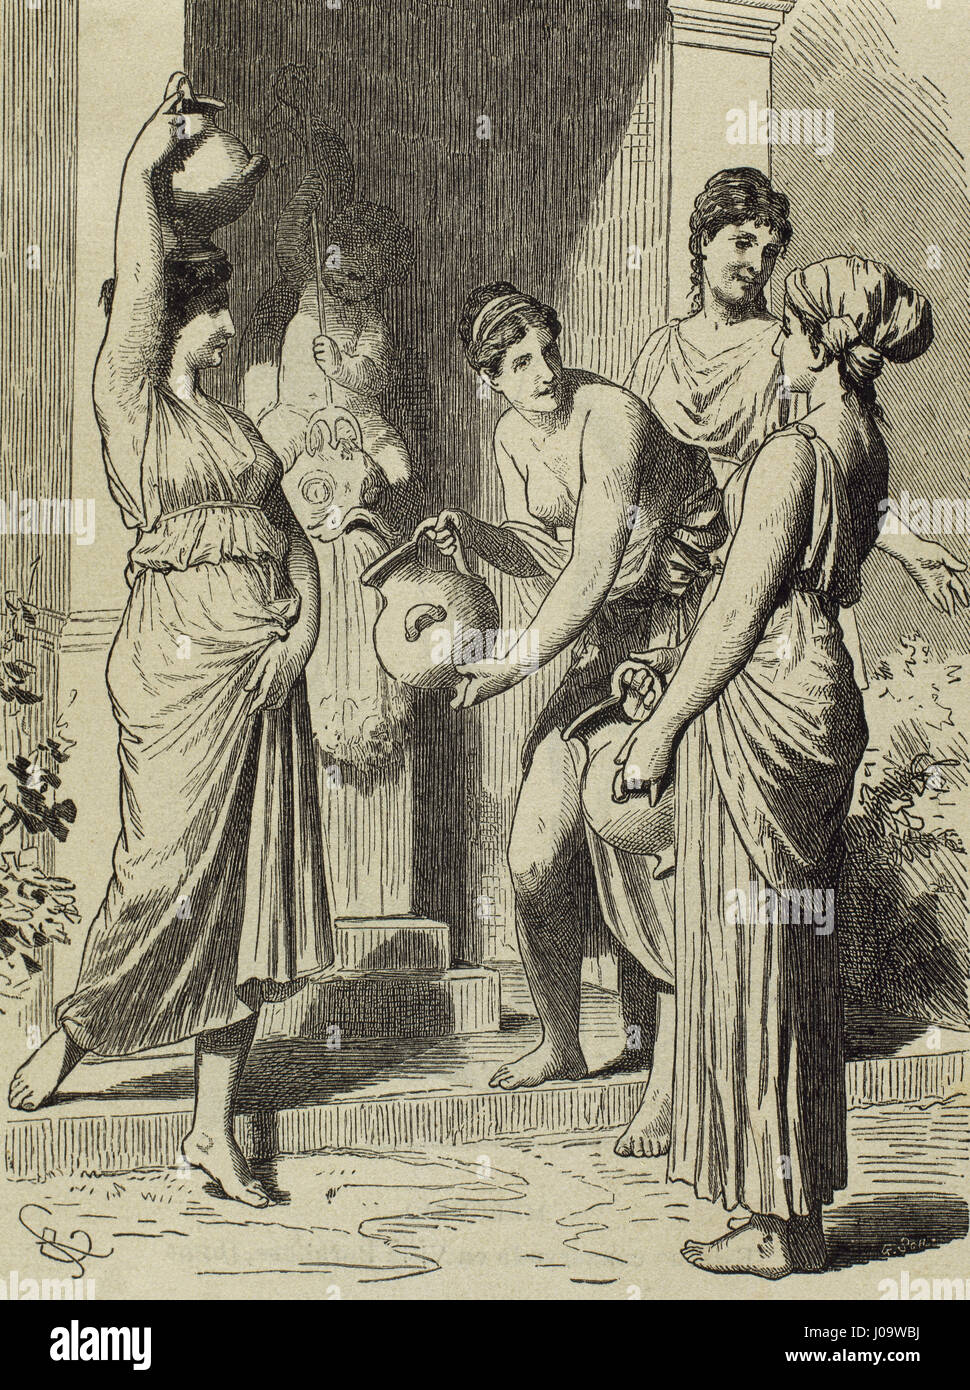 Greece. The slaves are picking water up from the public fountain. Engraving. 'El Mundo Ilustrado', 1880. Stock Photo